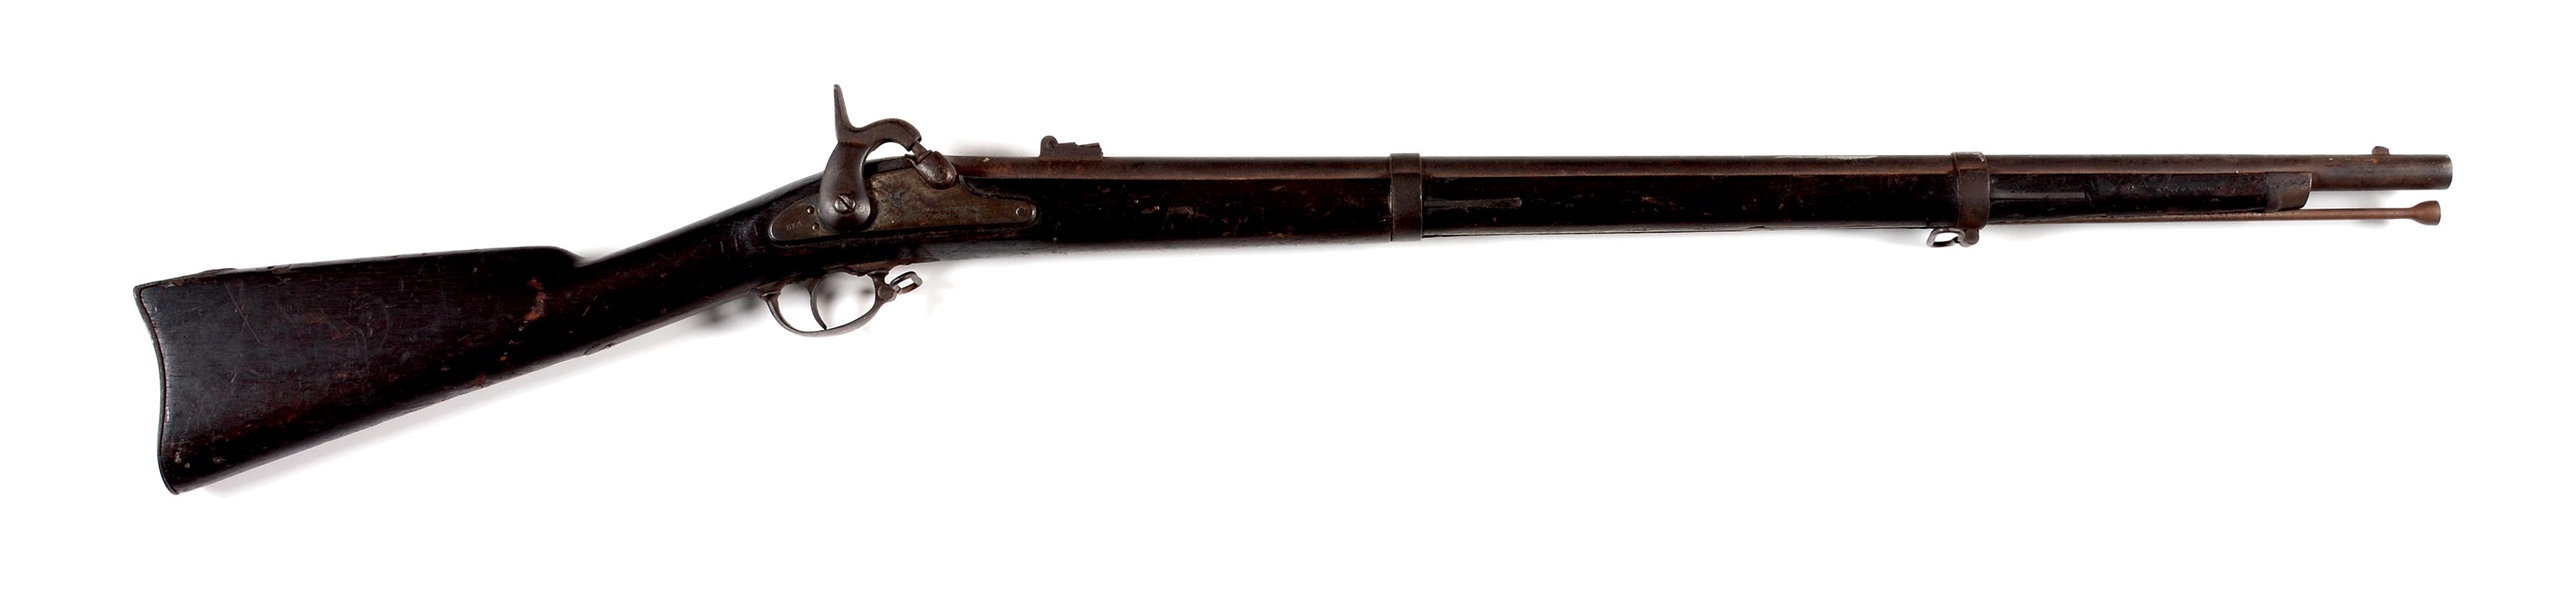 (A) PARKER SNOW & CO. PERCUSSION MUSKET.